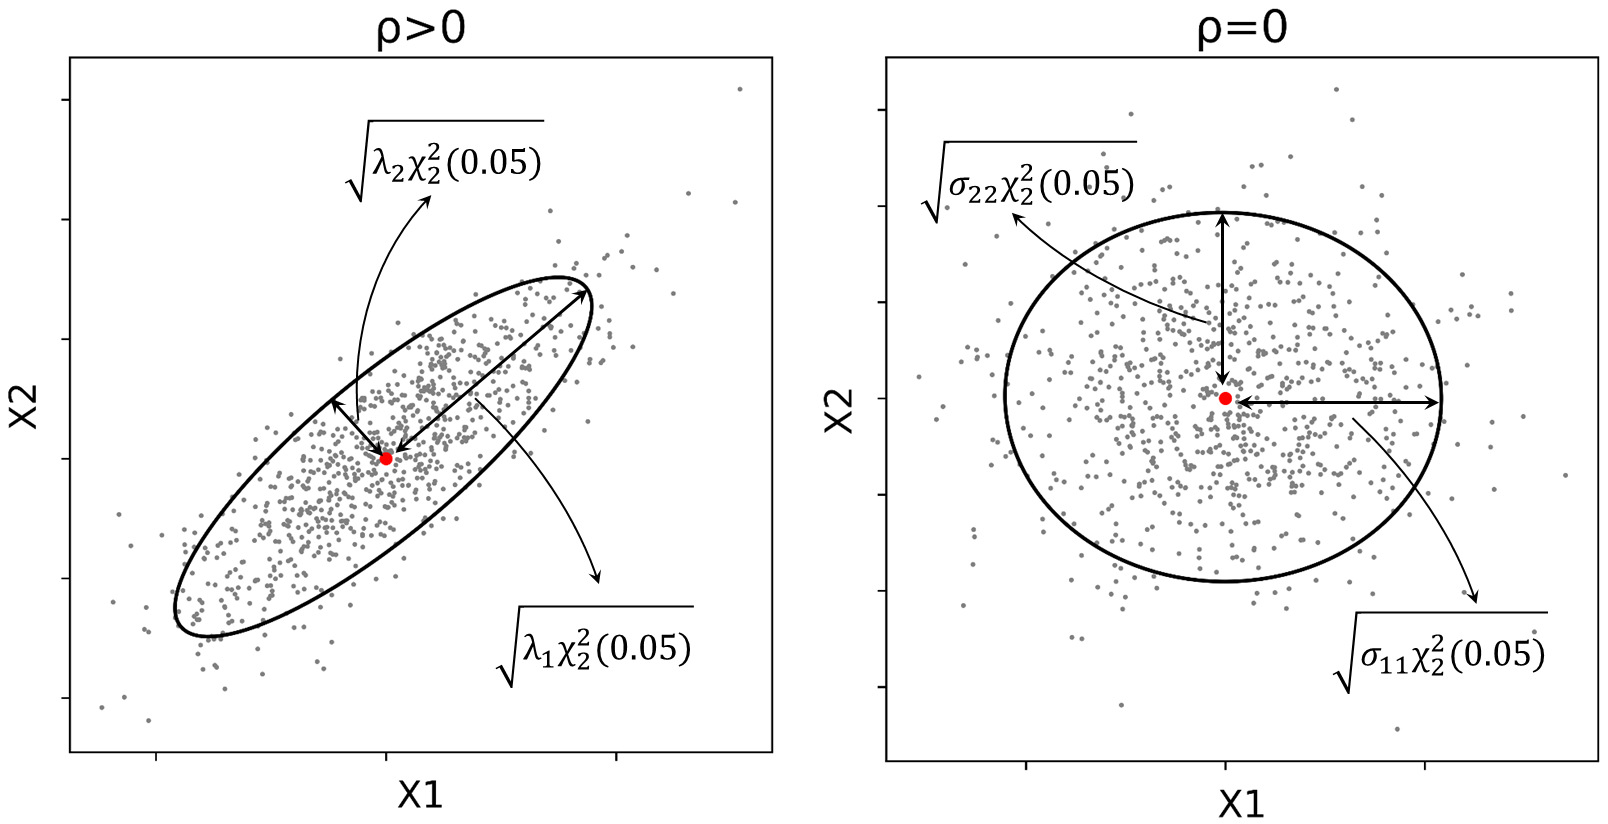 95\% confidence ellipses and their semi-diameters when \rho>0 and \rho=0